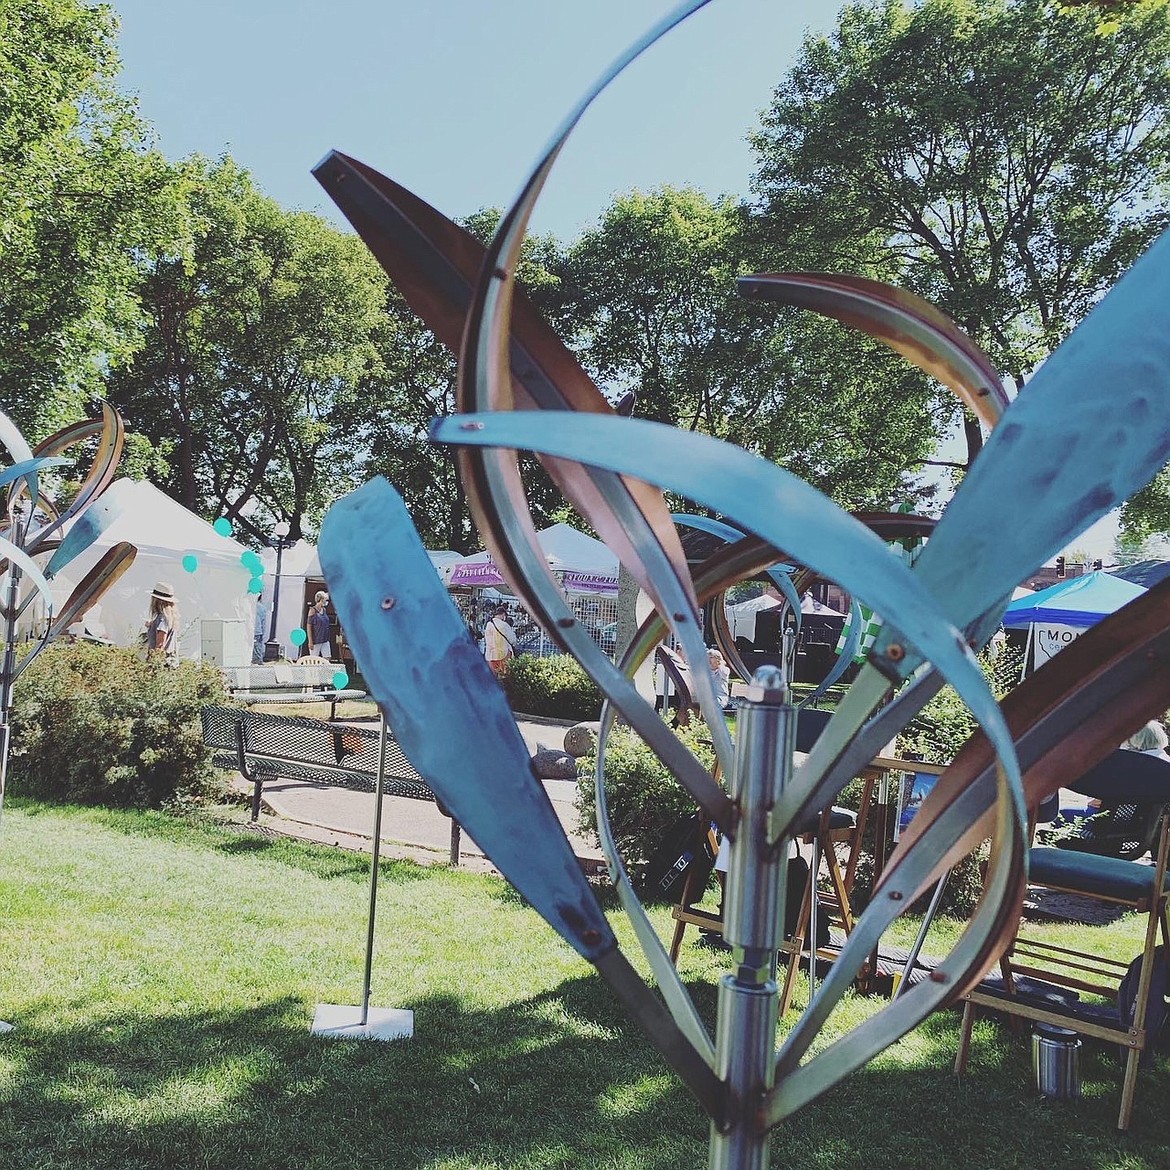 Metal sculpture is one of many mediums featured at the Hockaday Museum of Art's annual juried Arts in the Park Festival.